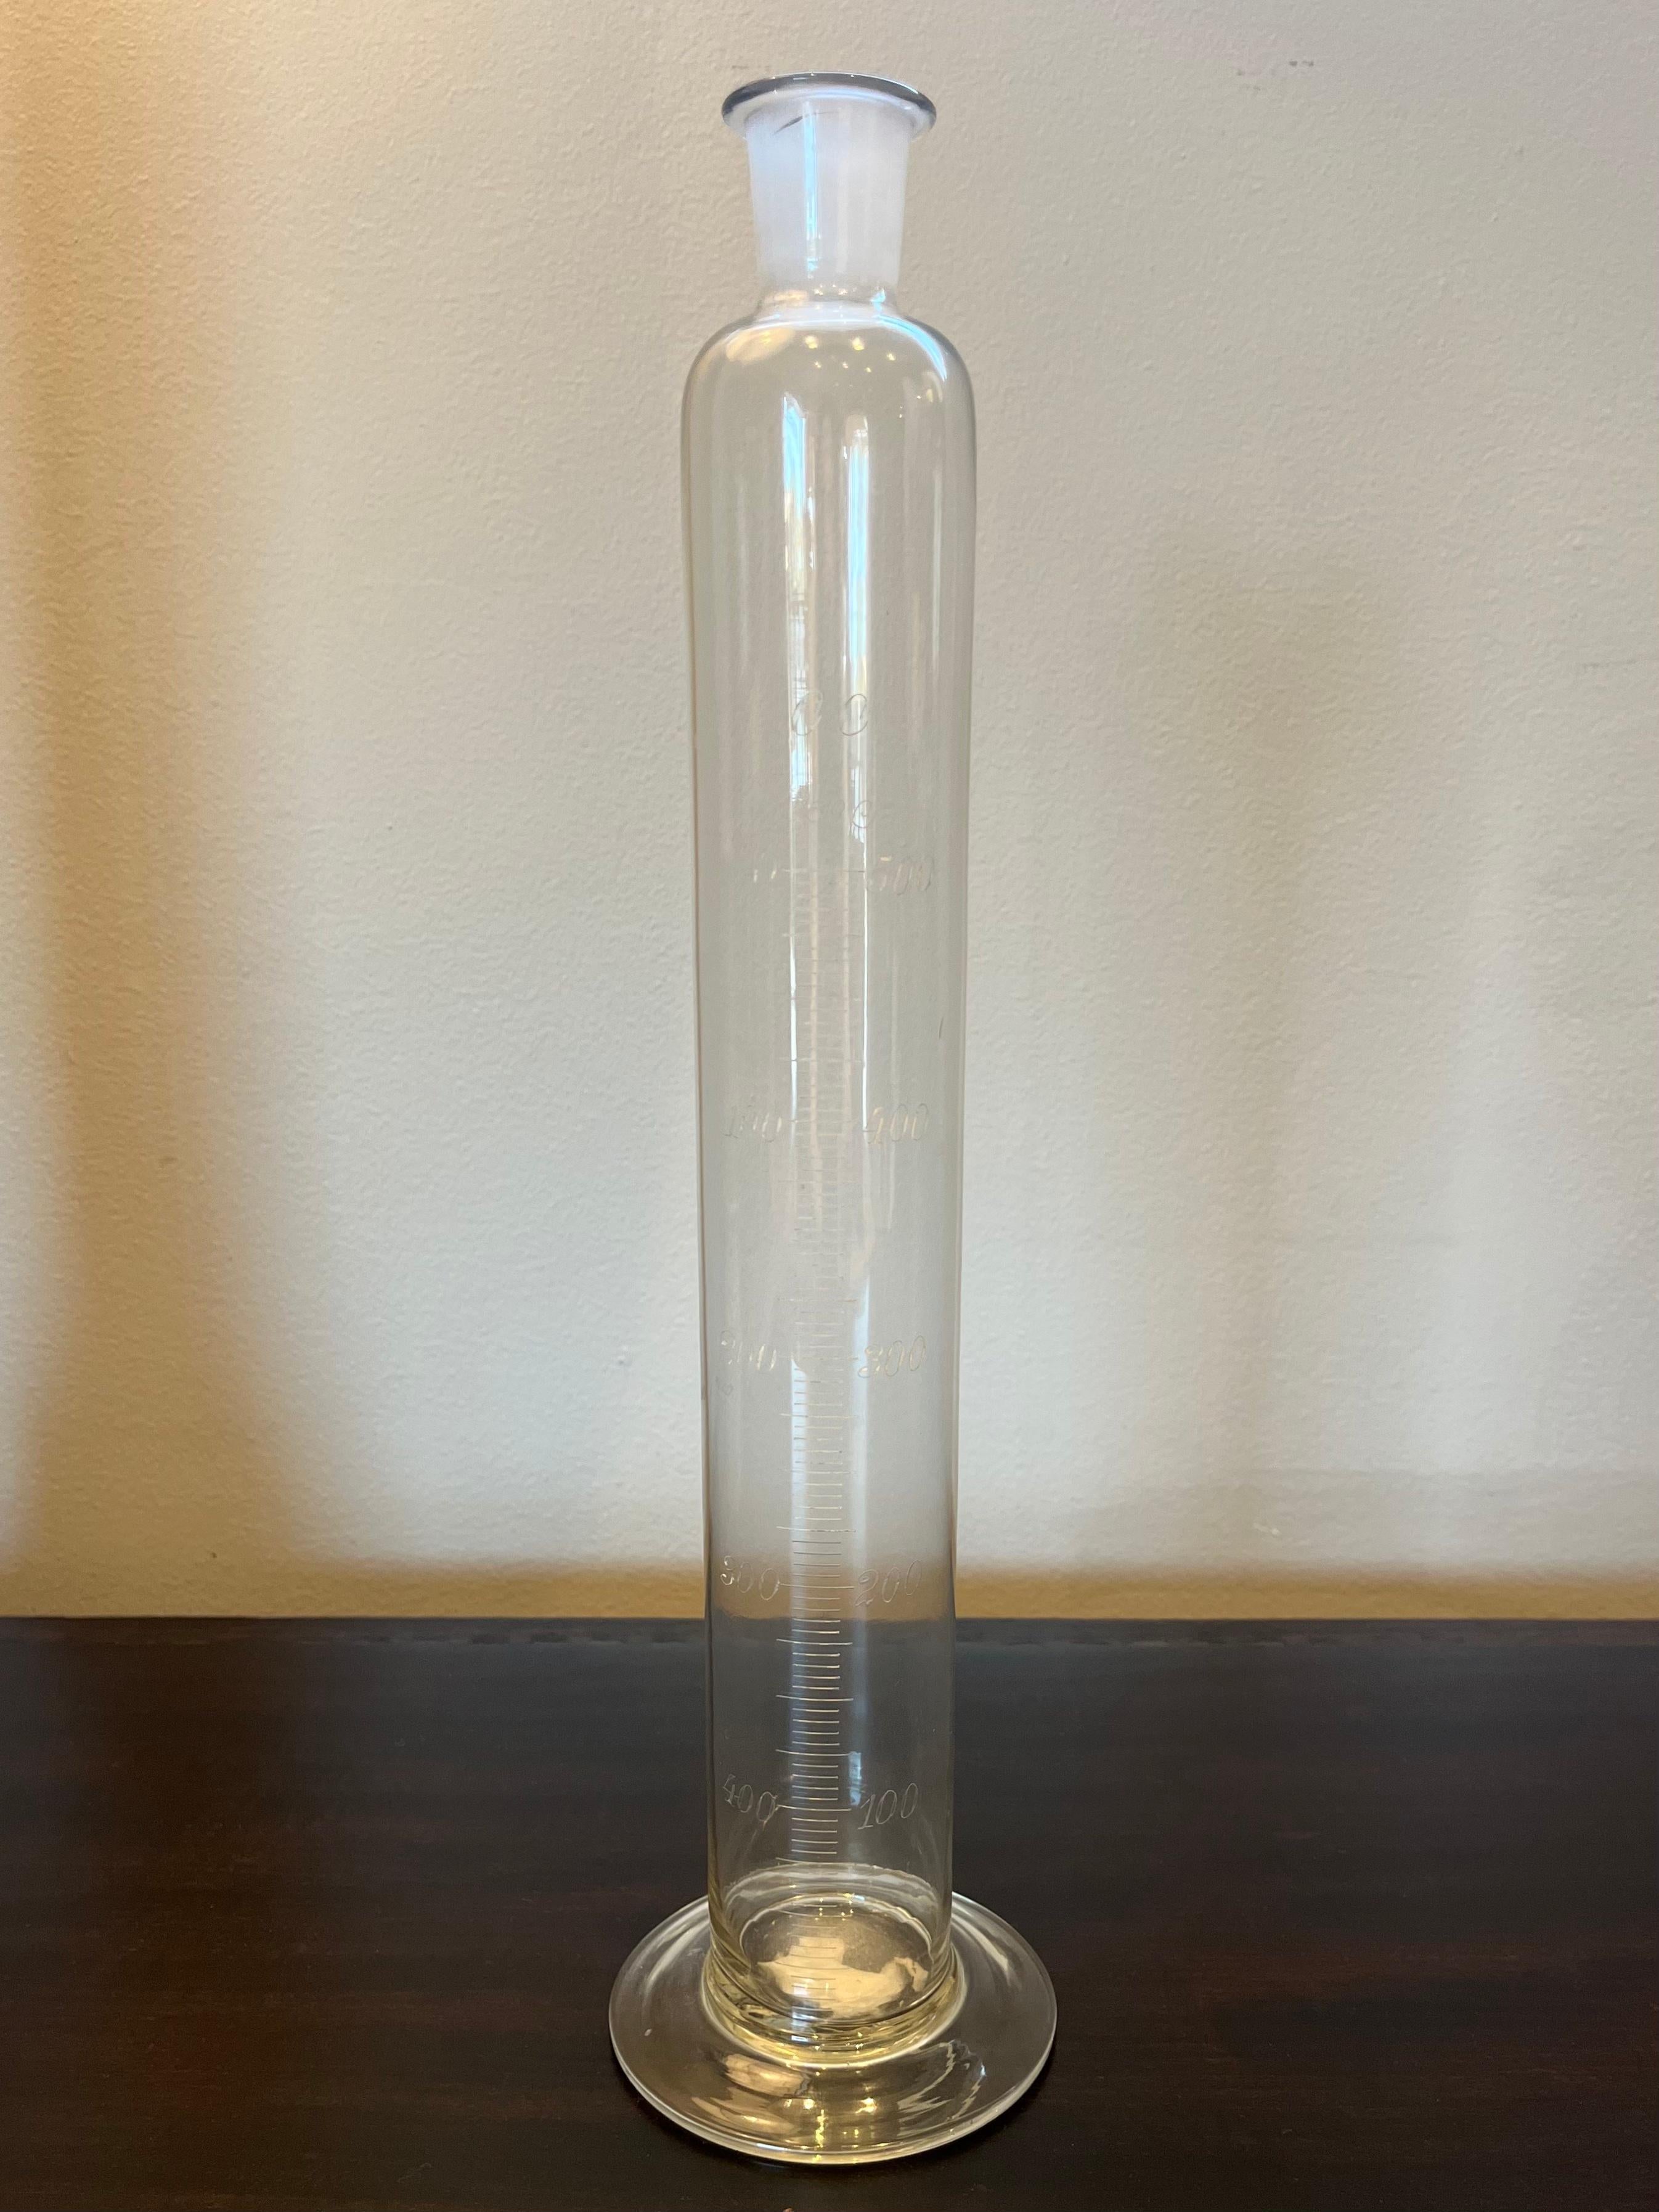 Glass chemist's beaker from 1900s France. The beaker has a cylindrical shape, small bottle neck and circular base with markings for various measurements. The engraved script is remarkably elegant and delicate. A wonderful example of an early